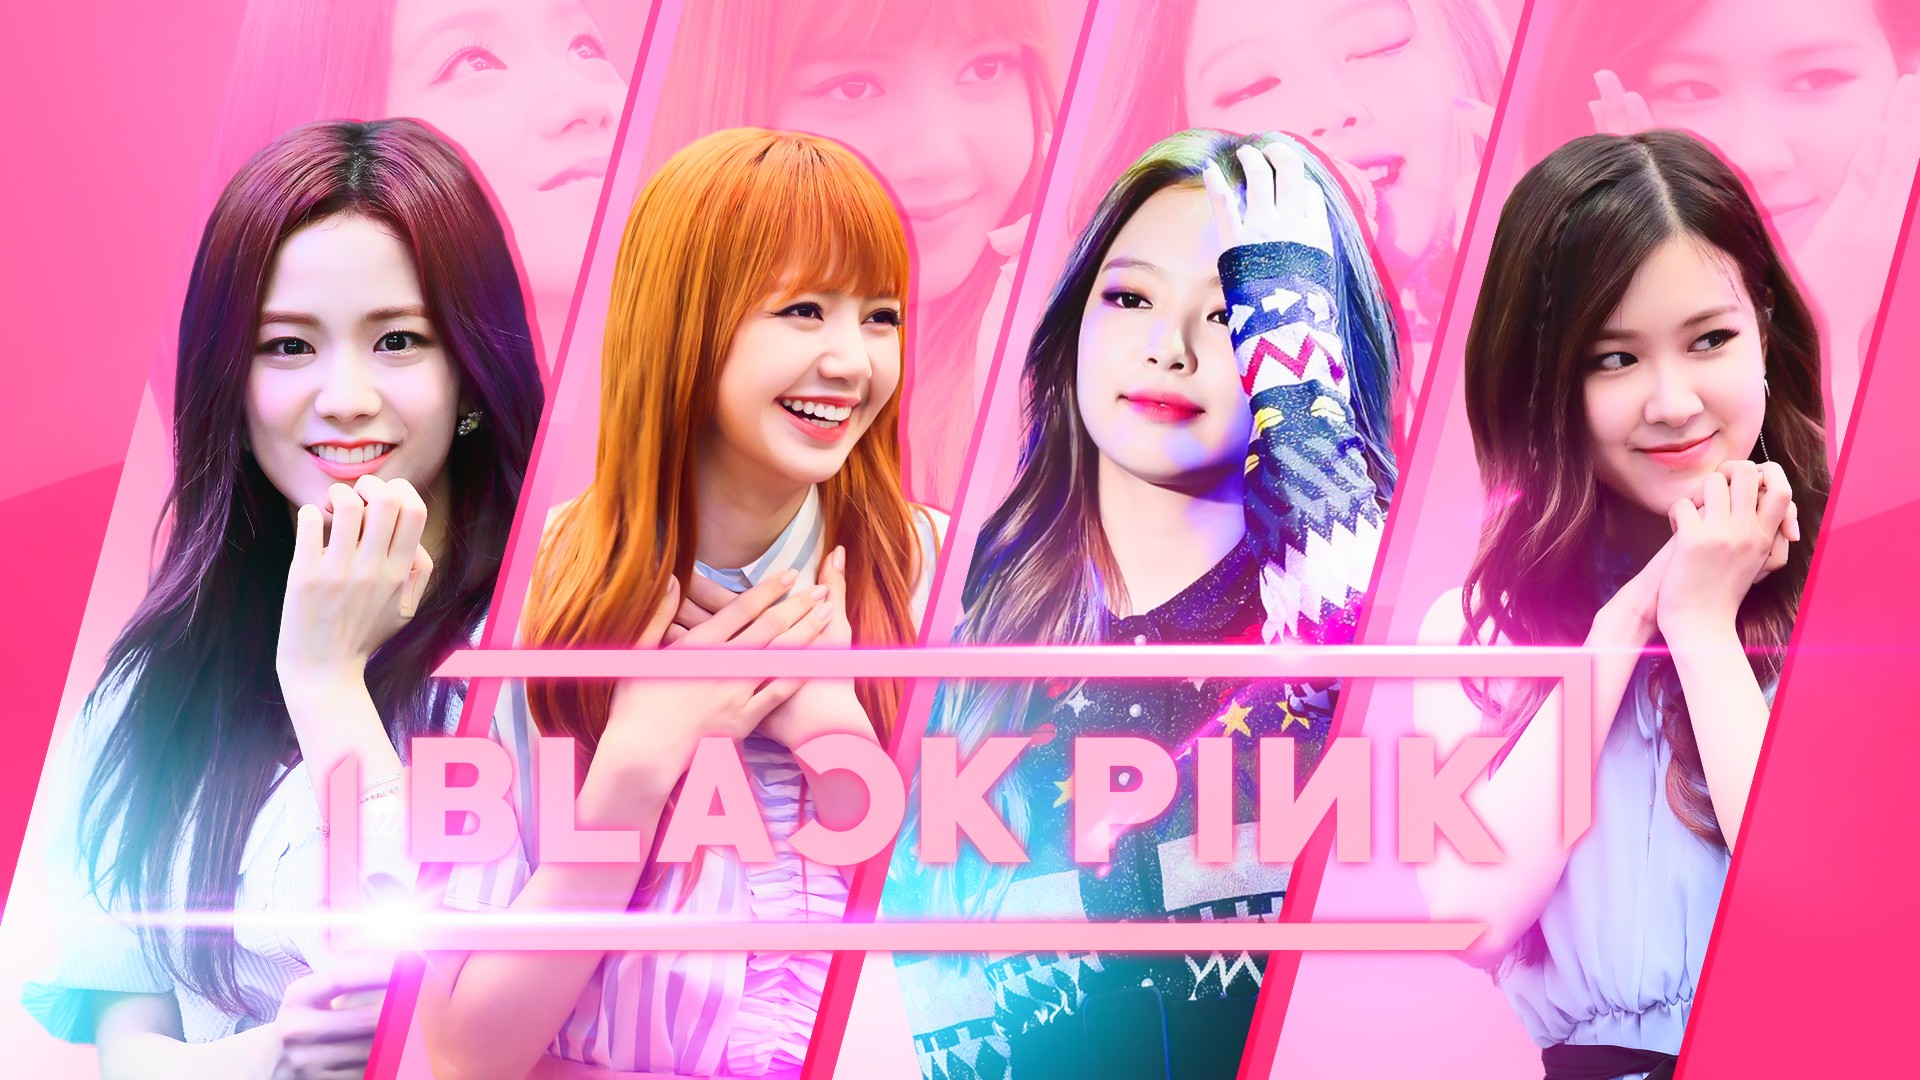 Desktop Wallpaper Blackpink with high-resolution 1920x1080 pixel. You can use this wallpaper for your Windows and Mac OS computers as well as your Android and iPhone smartphones